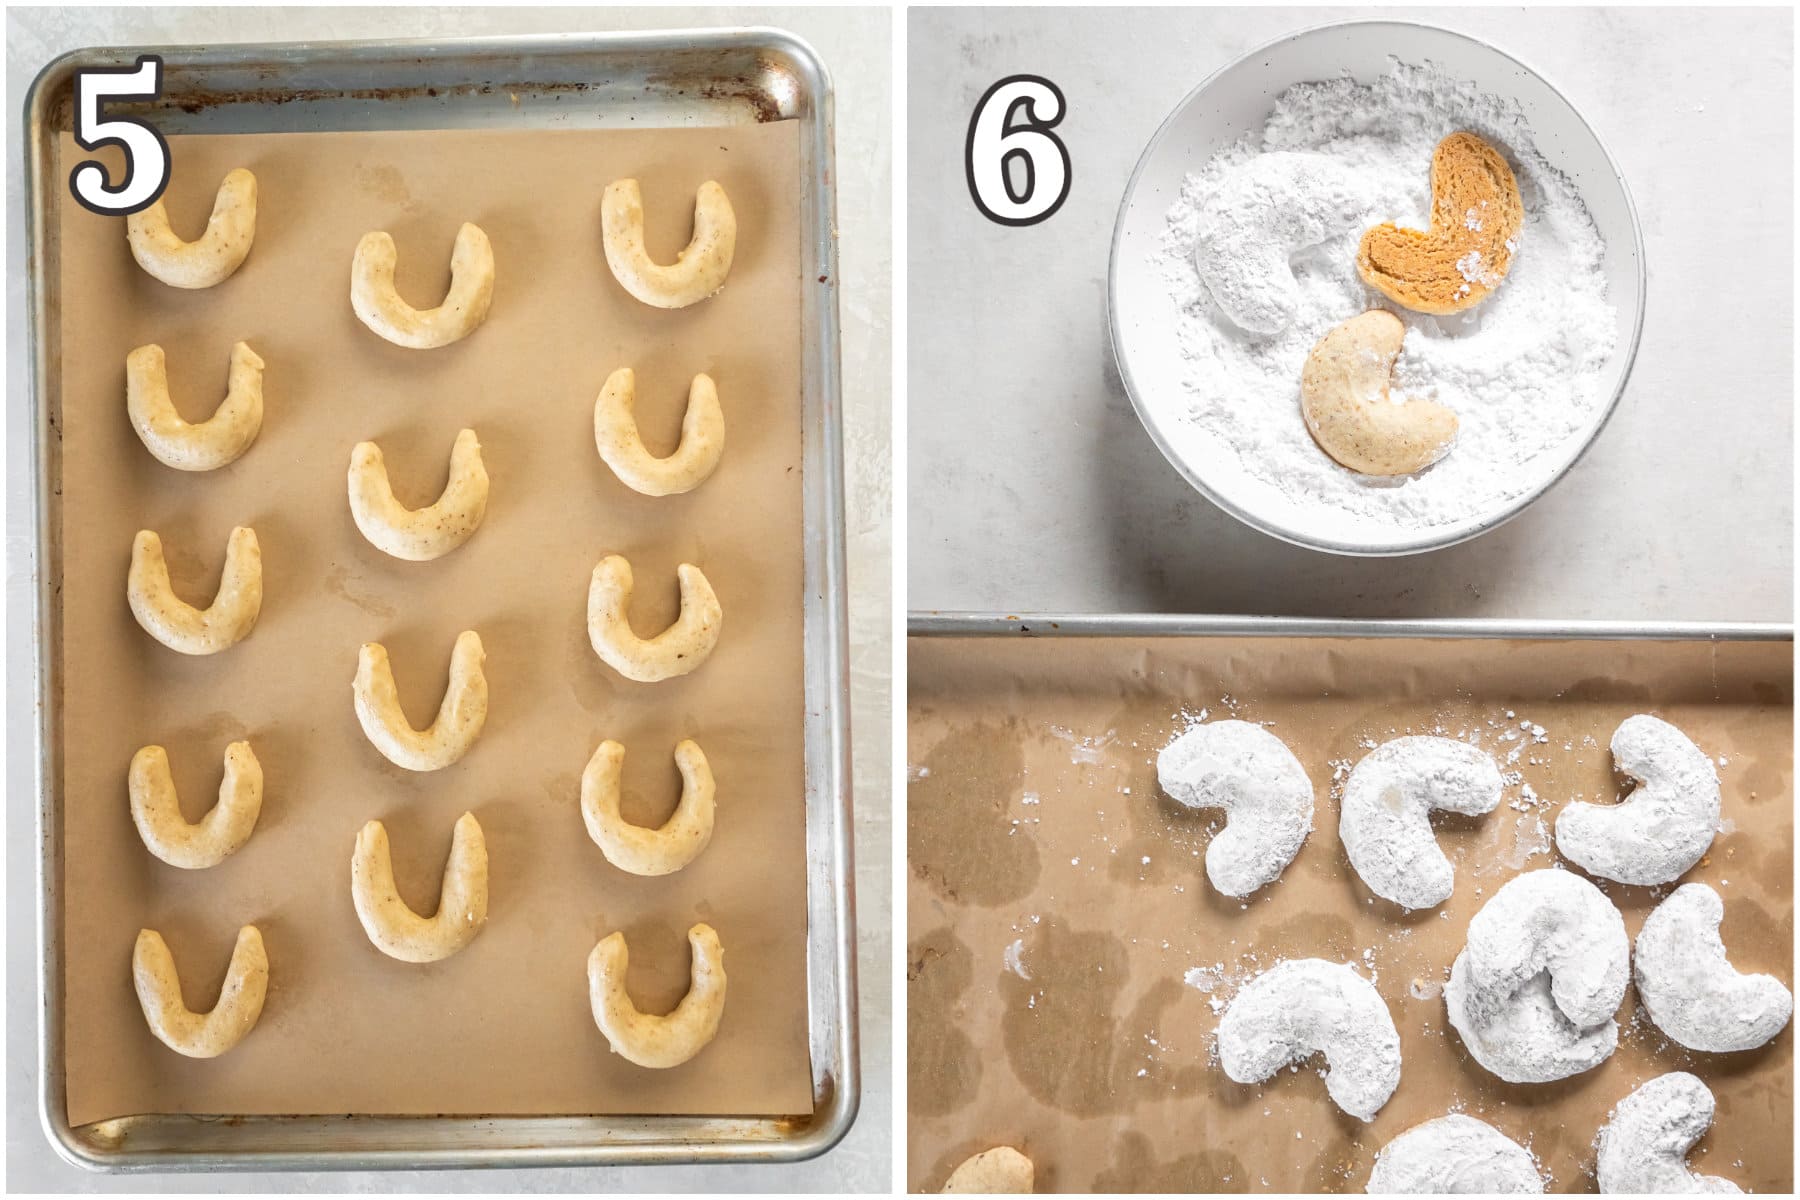 two photo collage demonstrating how to shape kipferl cookies and coat them in confectioners' sugar.